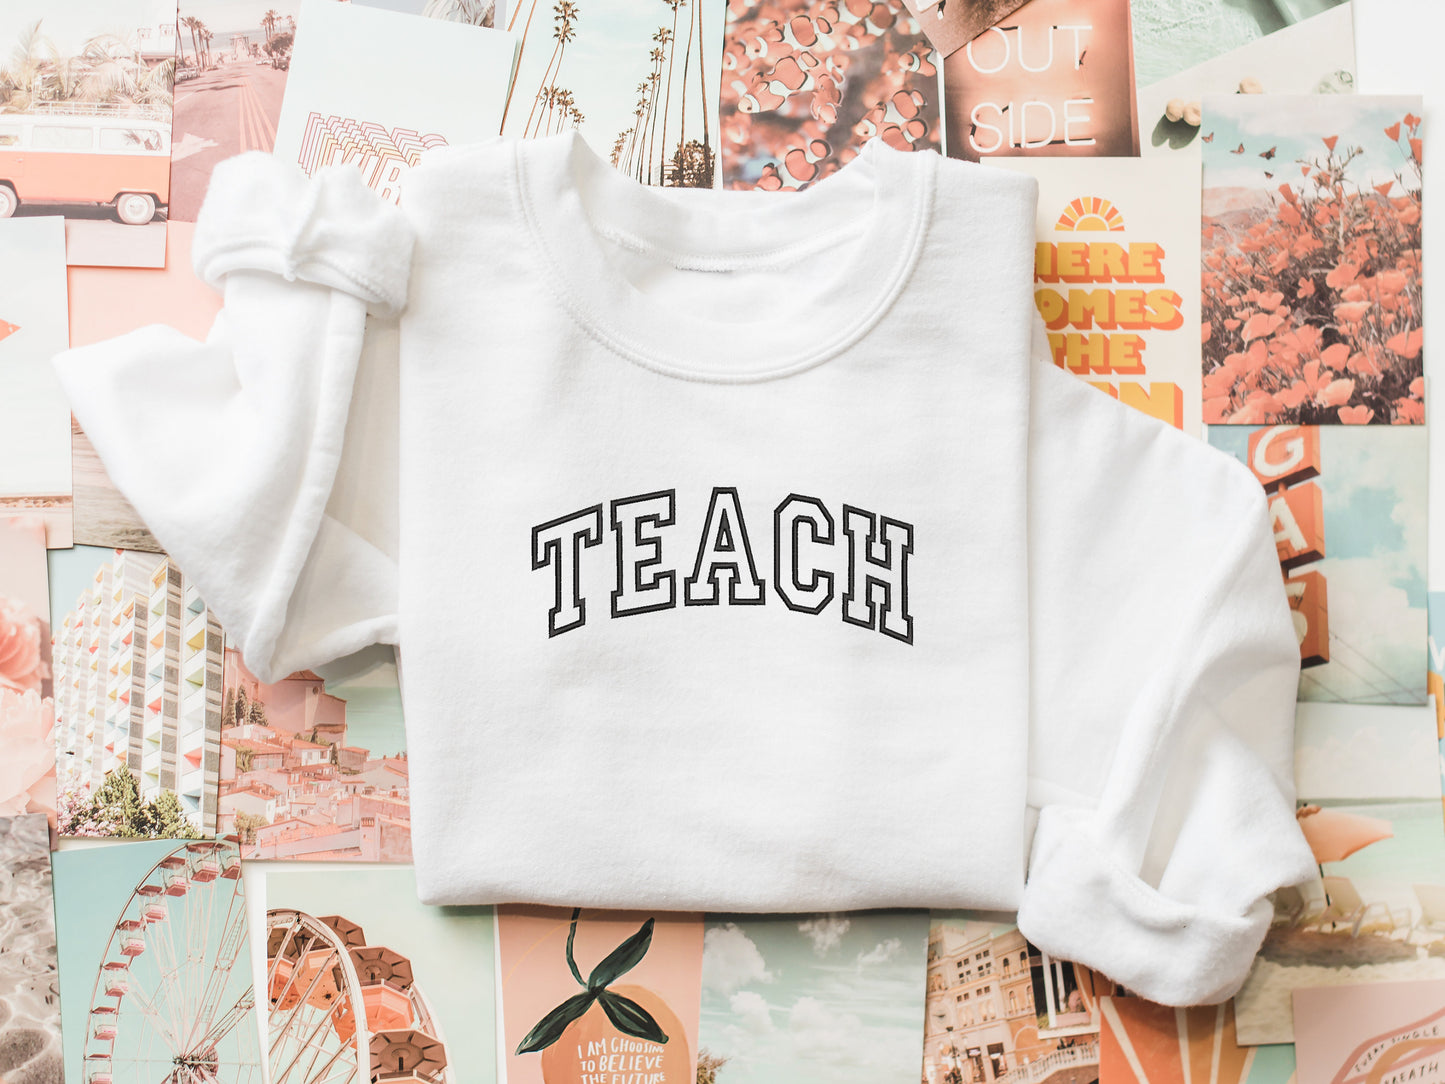 Embroidered Sweatshirt, Embroidery, Teacher Sweatshirt, Gifts for Teacher, Teacher Gift, Christmas Gifts, Gifts for Women, Unique Gift